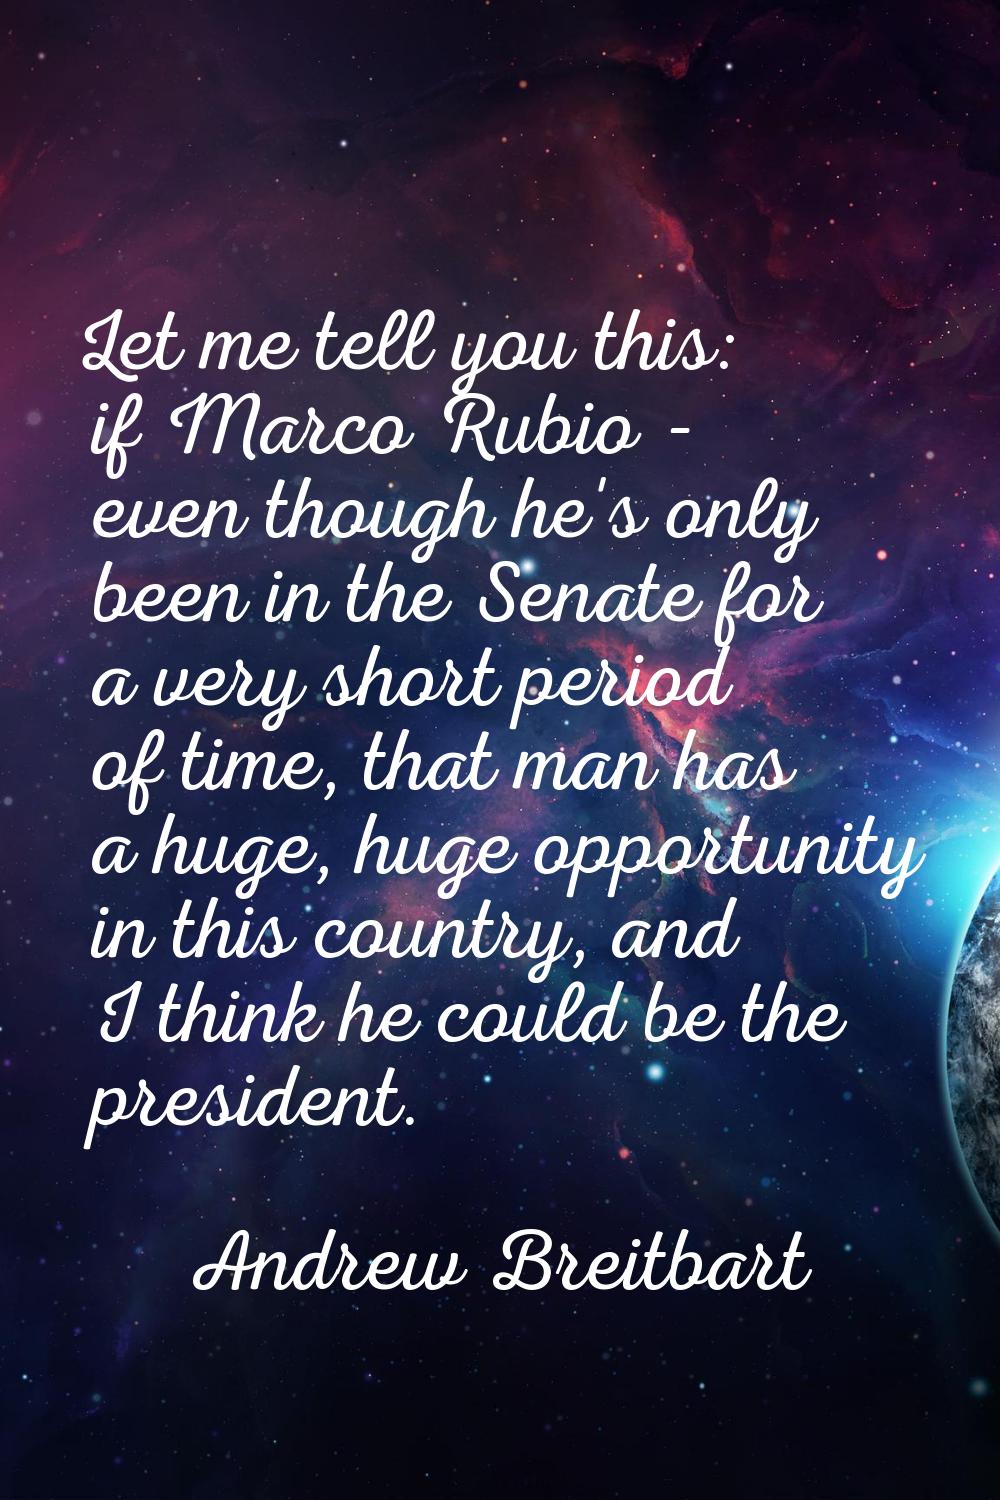 Let me tell you this: if Marco Rubio - even though he's only been in the Senate for a very short pe